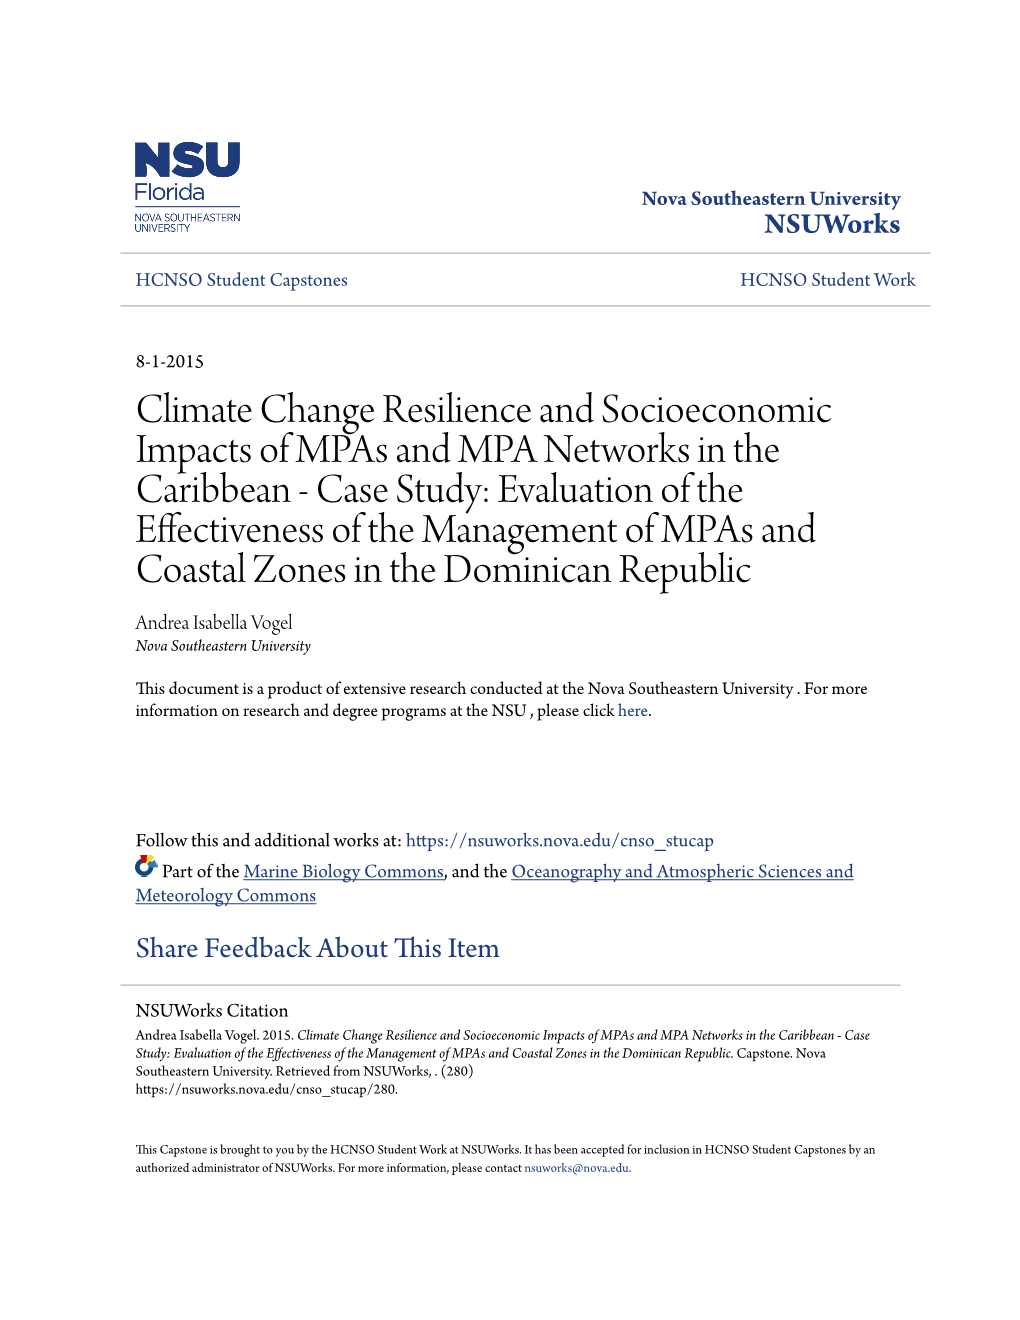 Climate Change Resilience and Socioeconomic